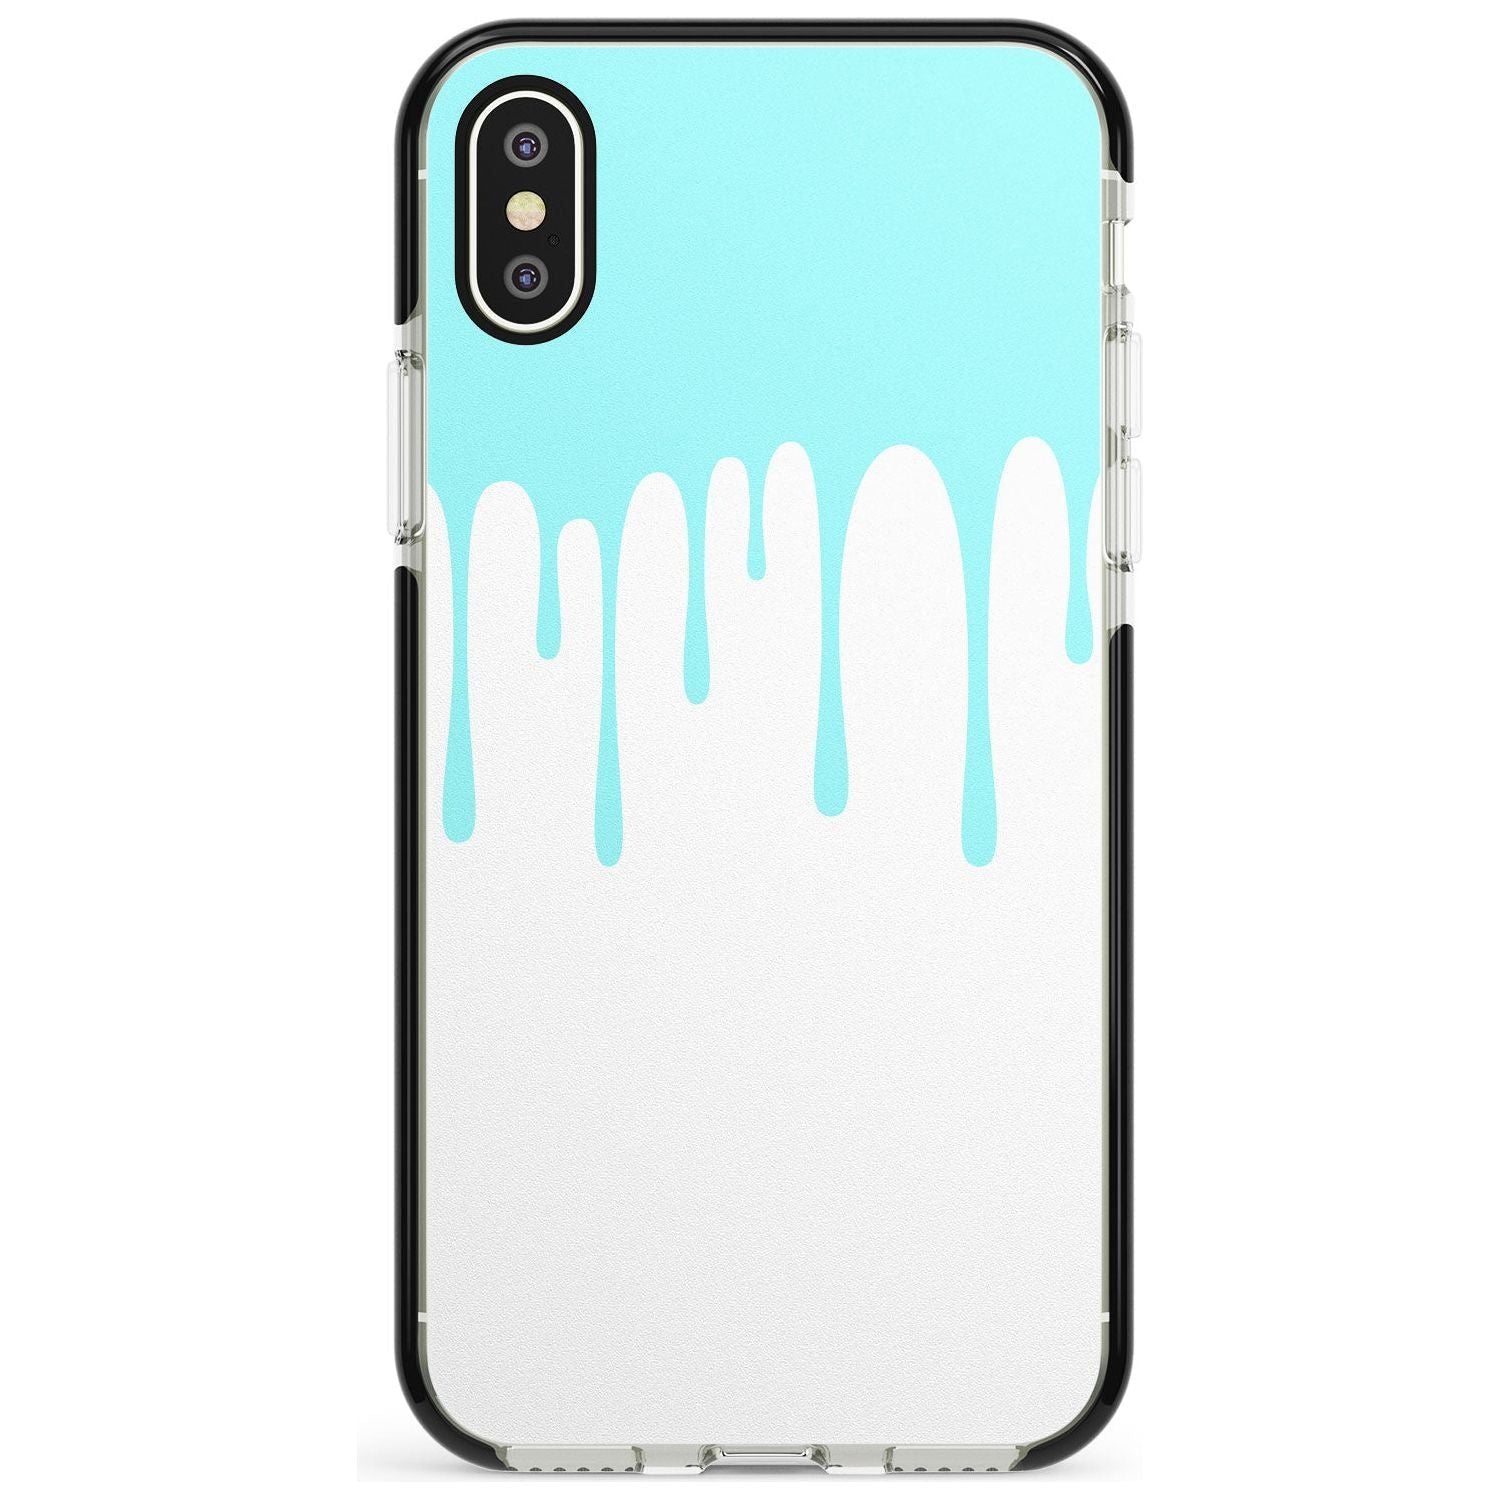 Melted Effect: Teal & White iPhone Case Black Impact Phone Case Warehouse X XS Max XR